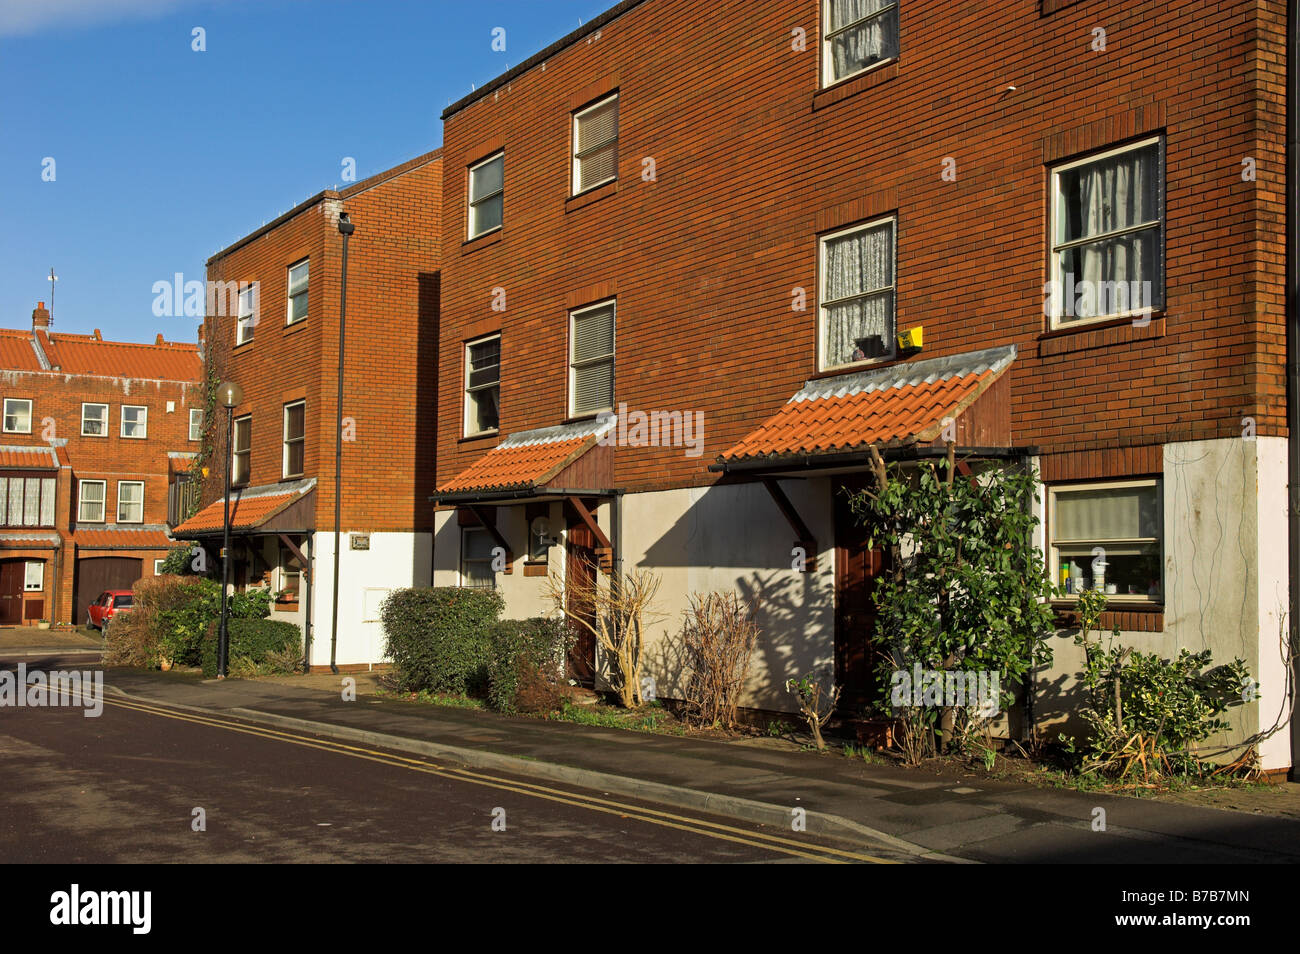 Modern brick built 1990s, late 20th century, townhouses in central Bristol England Stock Photo